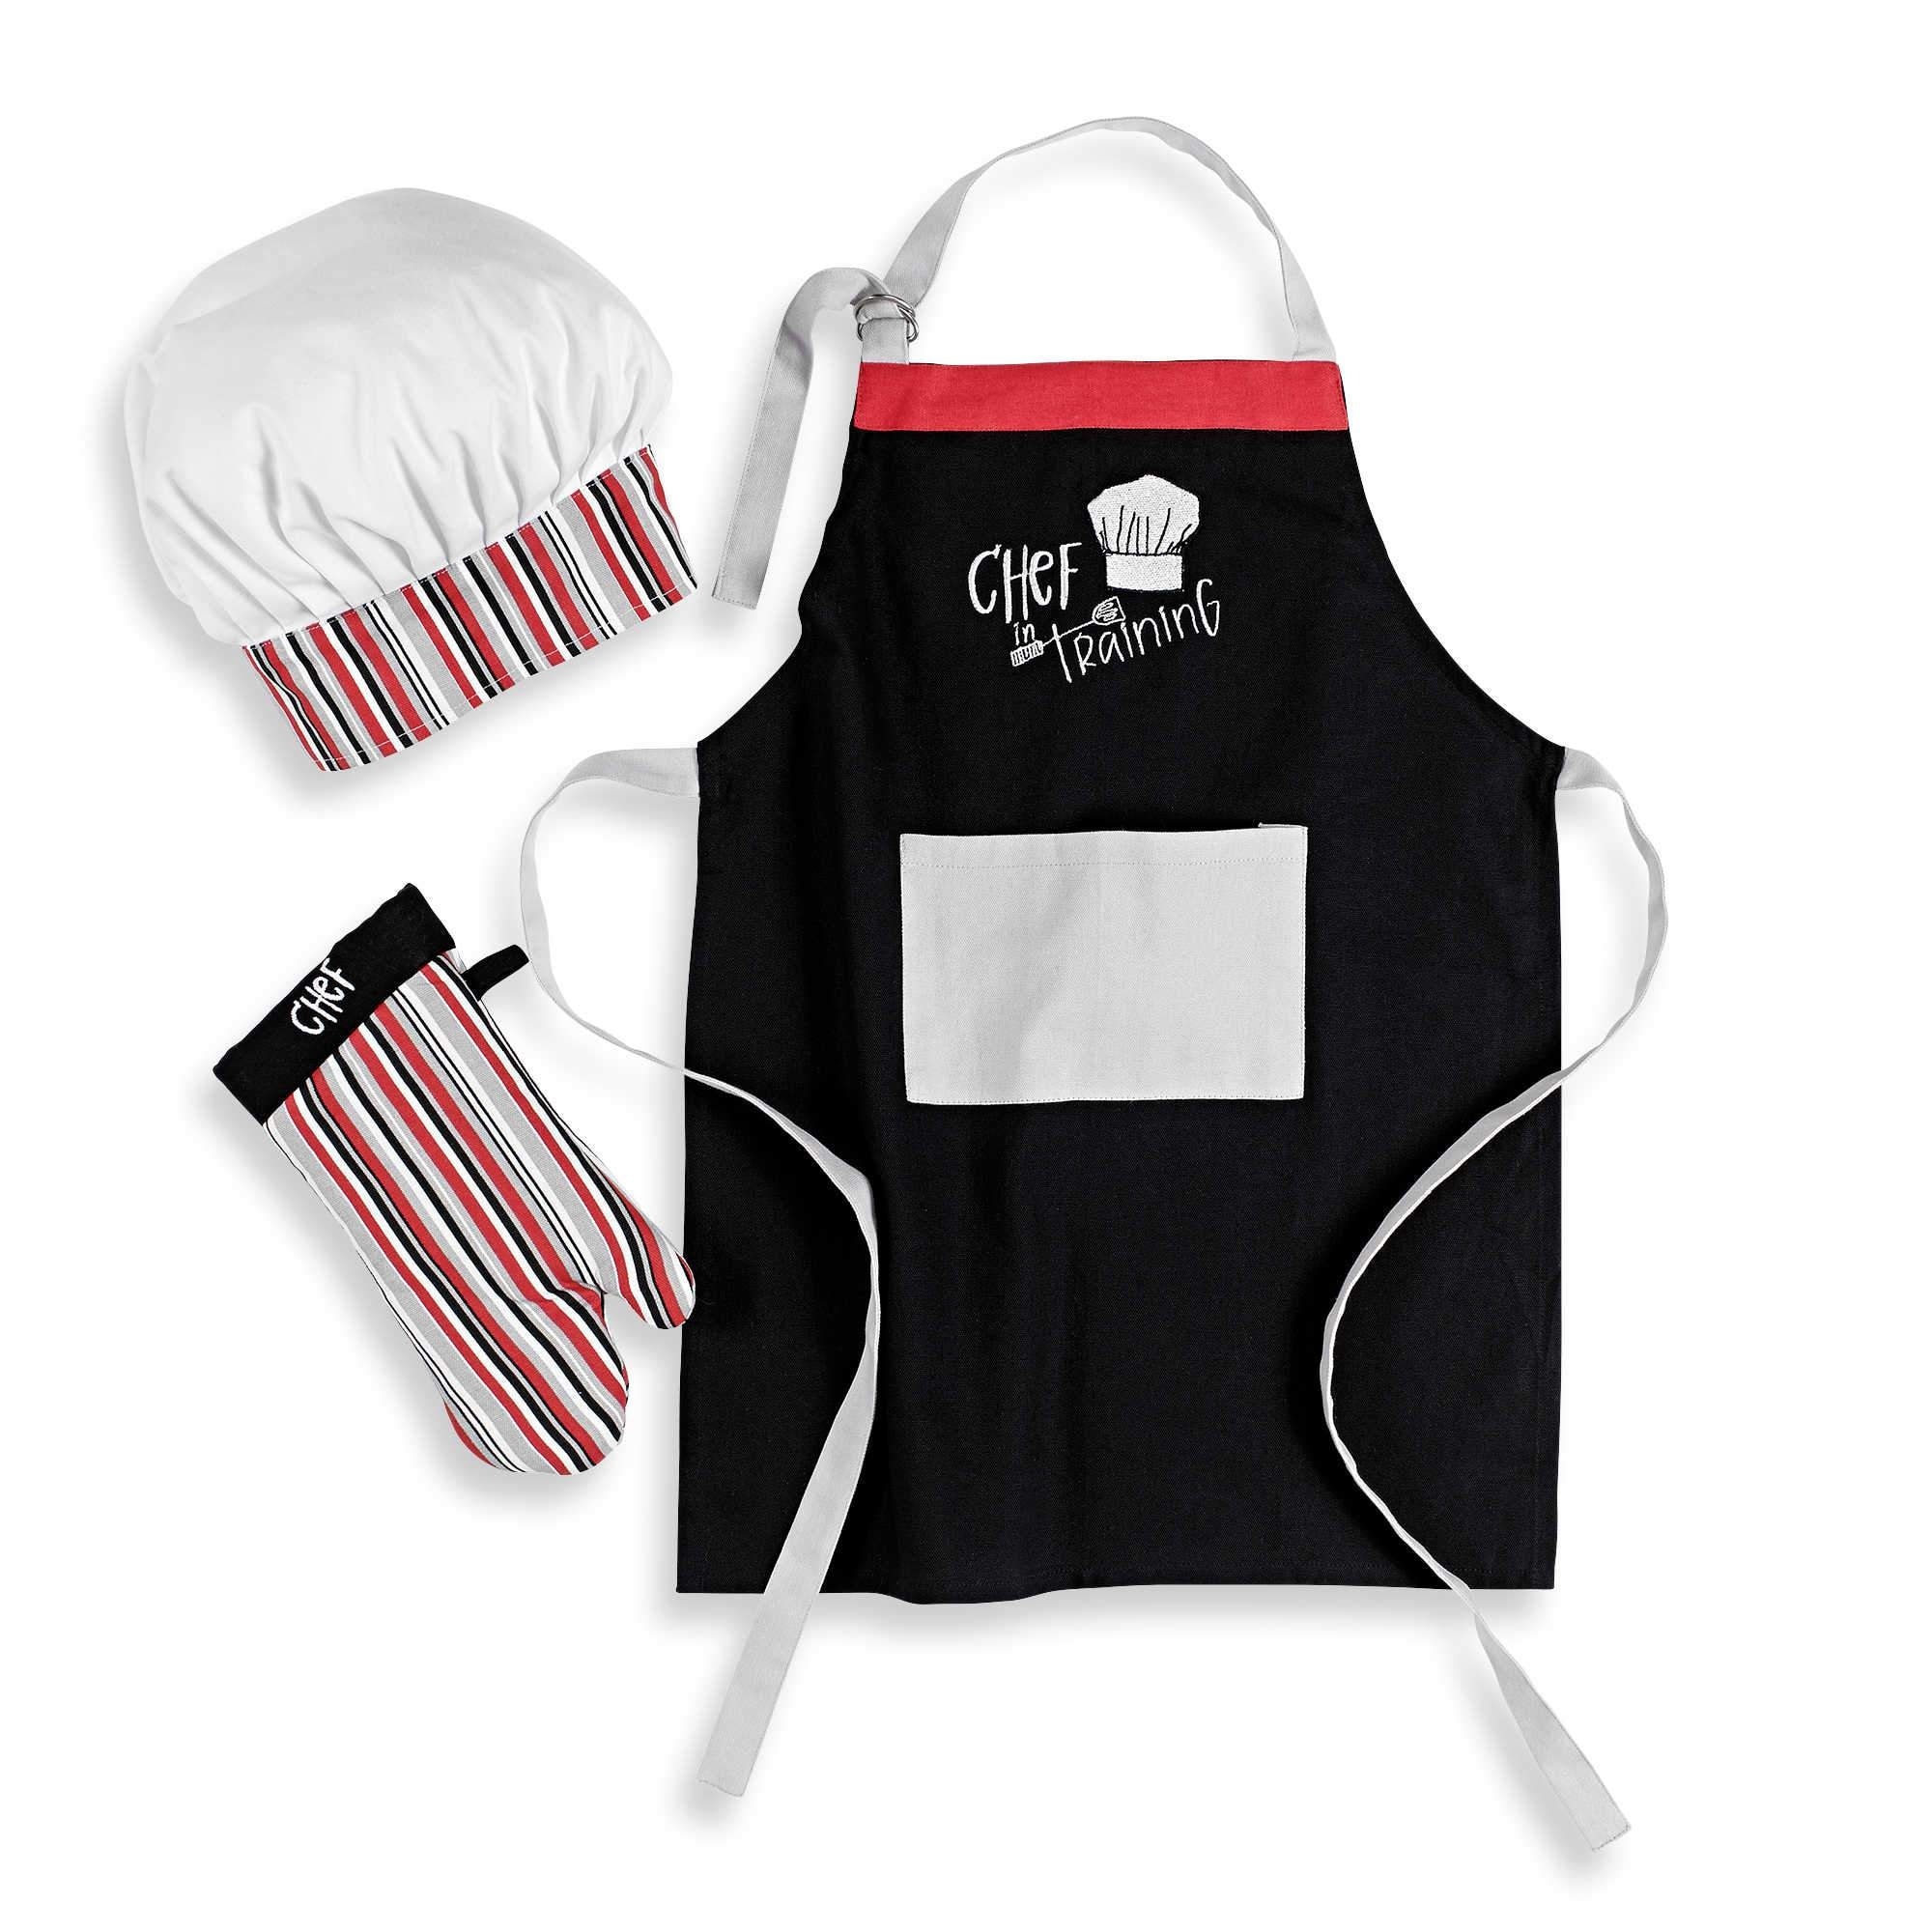 Suwimut 16 Pieces Kids Apron and Chef Hat Set Small Painting 4 Color Baking Training Wear Adjustable Children Chef Aprons with Pockets for 3-6 Years Old Boys and Girls Cooking 